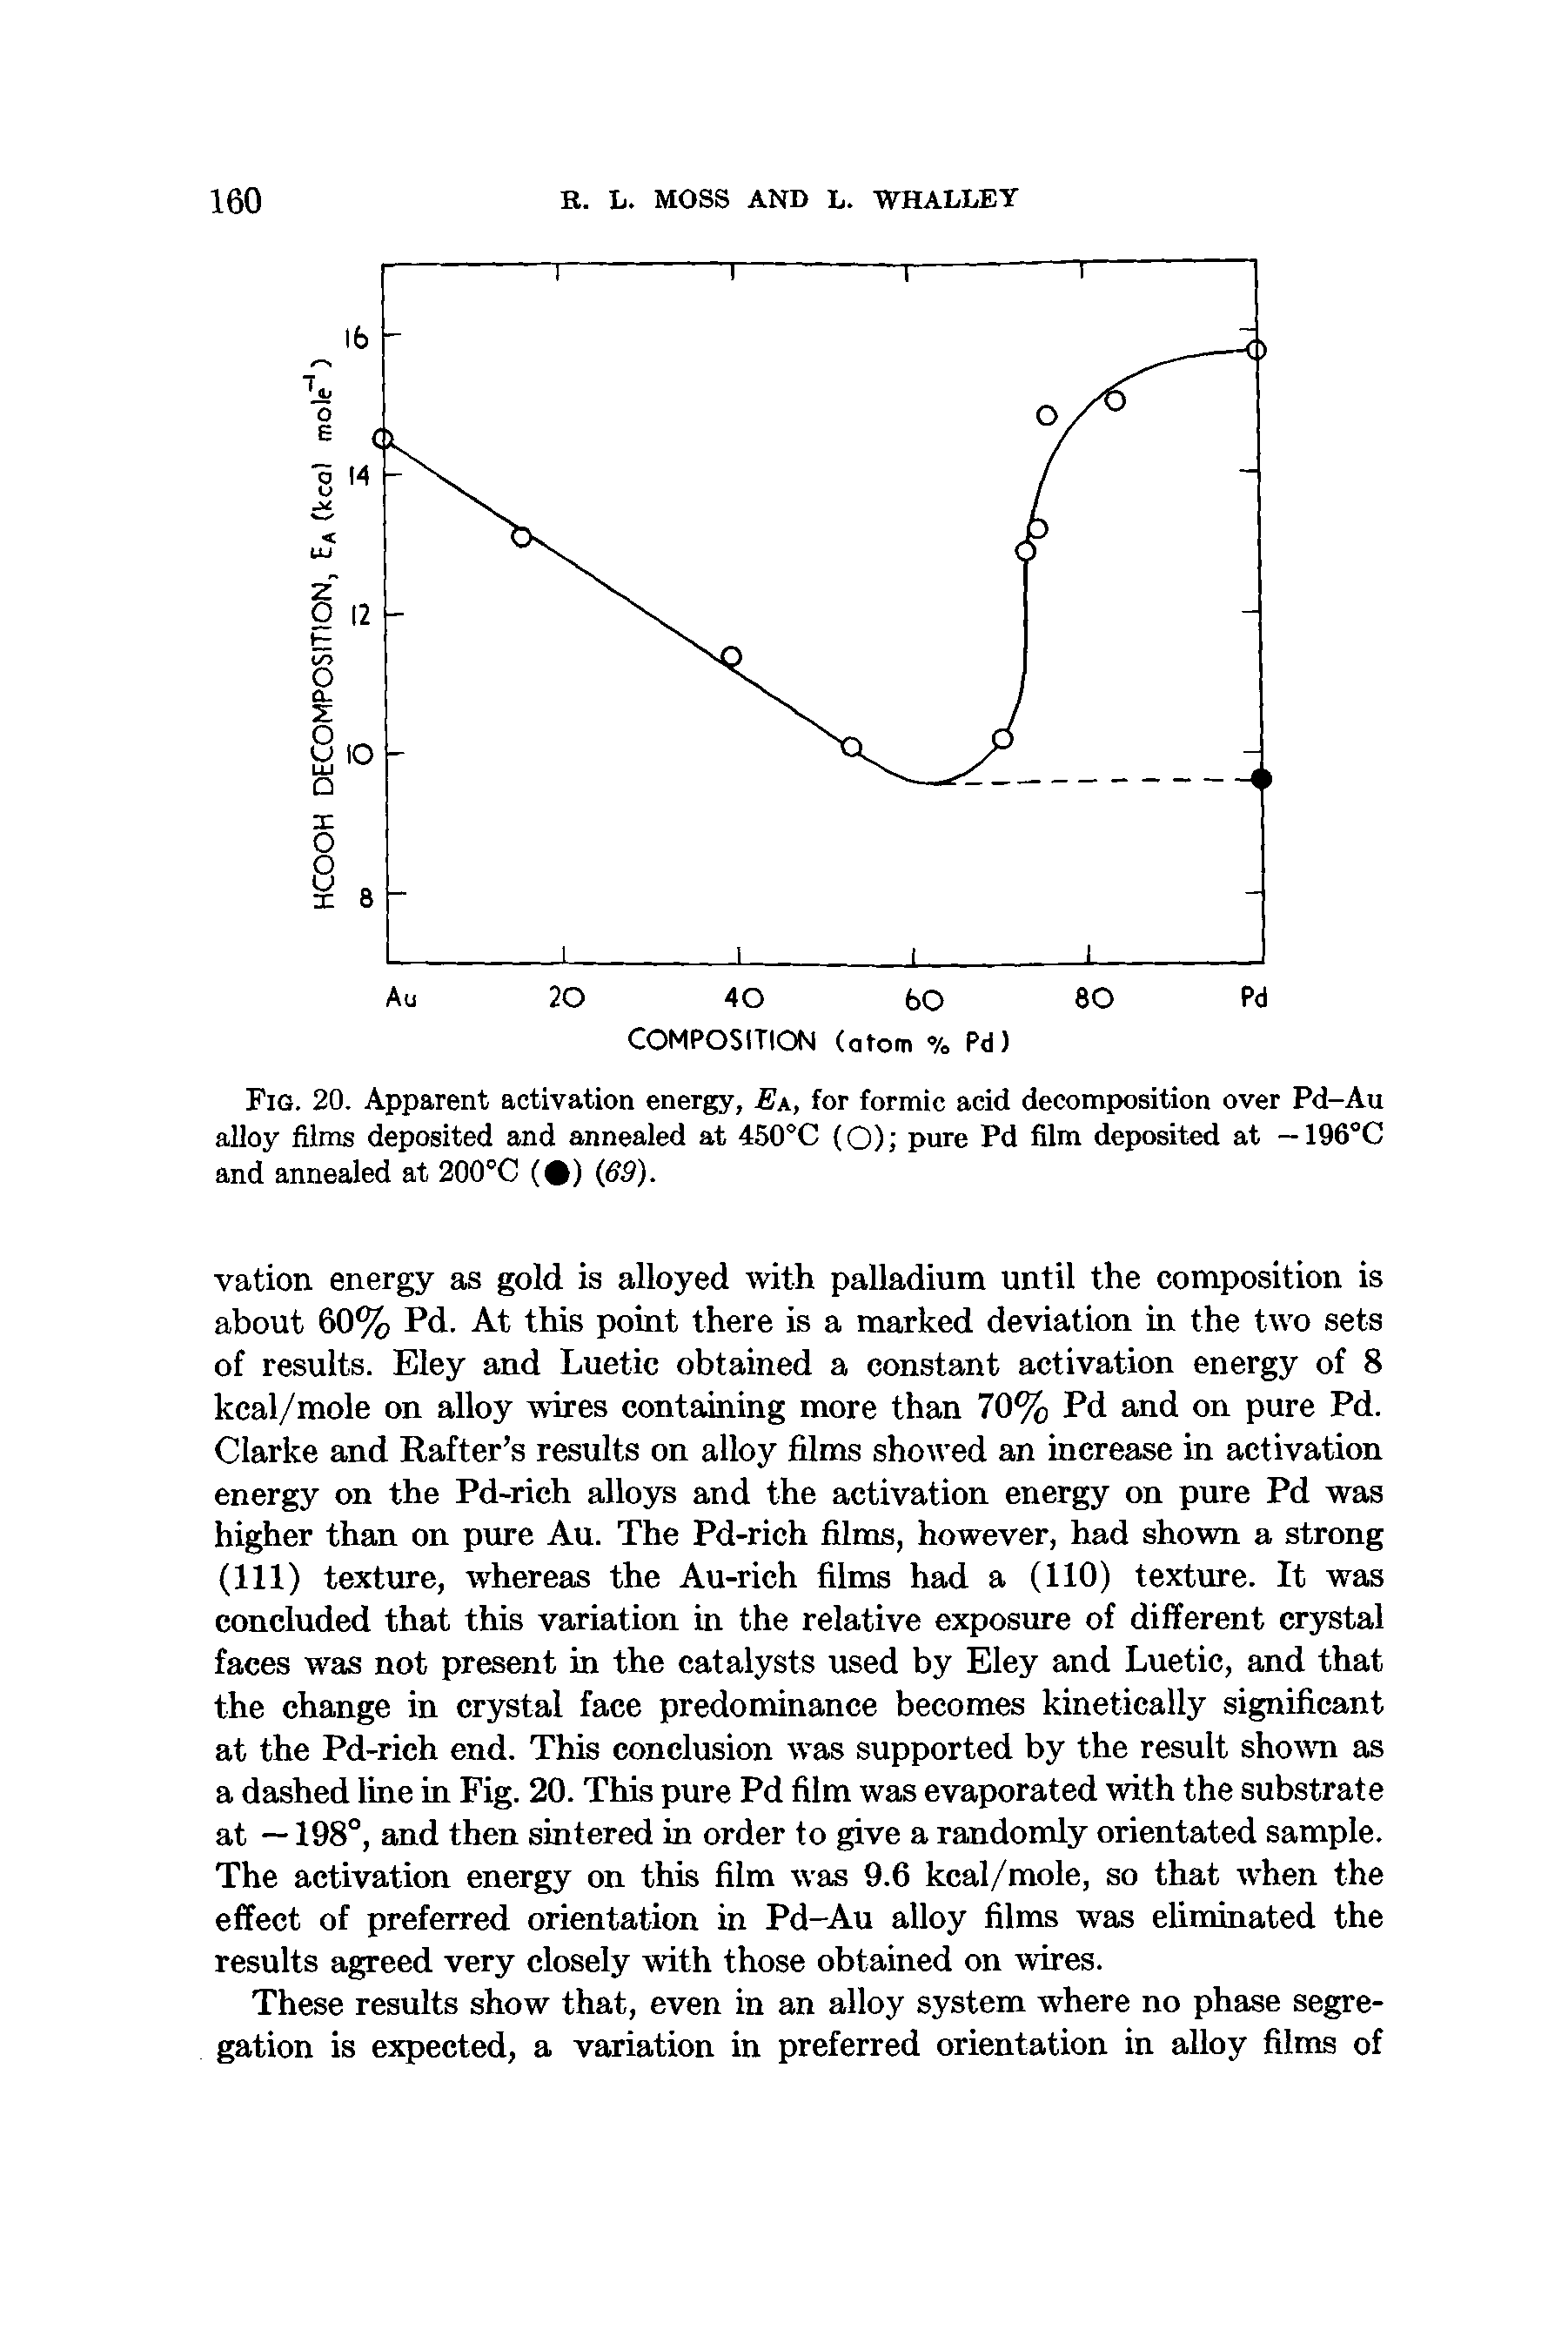 Fig. 20. Apparent activation energy, Ek, for formic acid decomposition over Pd-Au alloy films deposited and annealed at 450°C (O) pure Pd film deposited at — 196°C and annealed at 200°C ( ) (69).